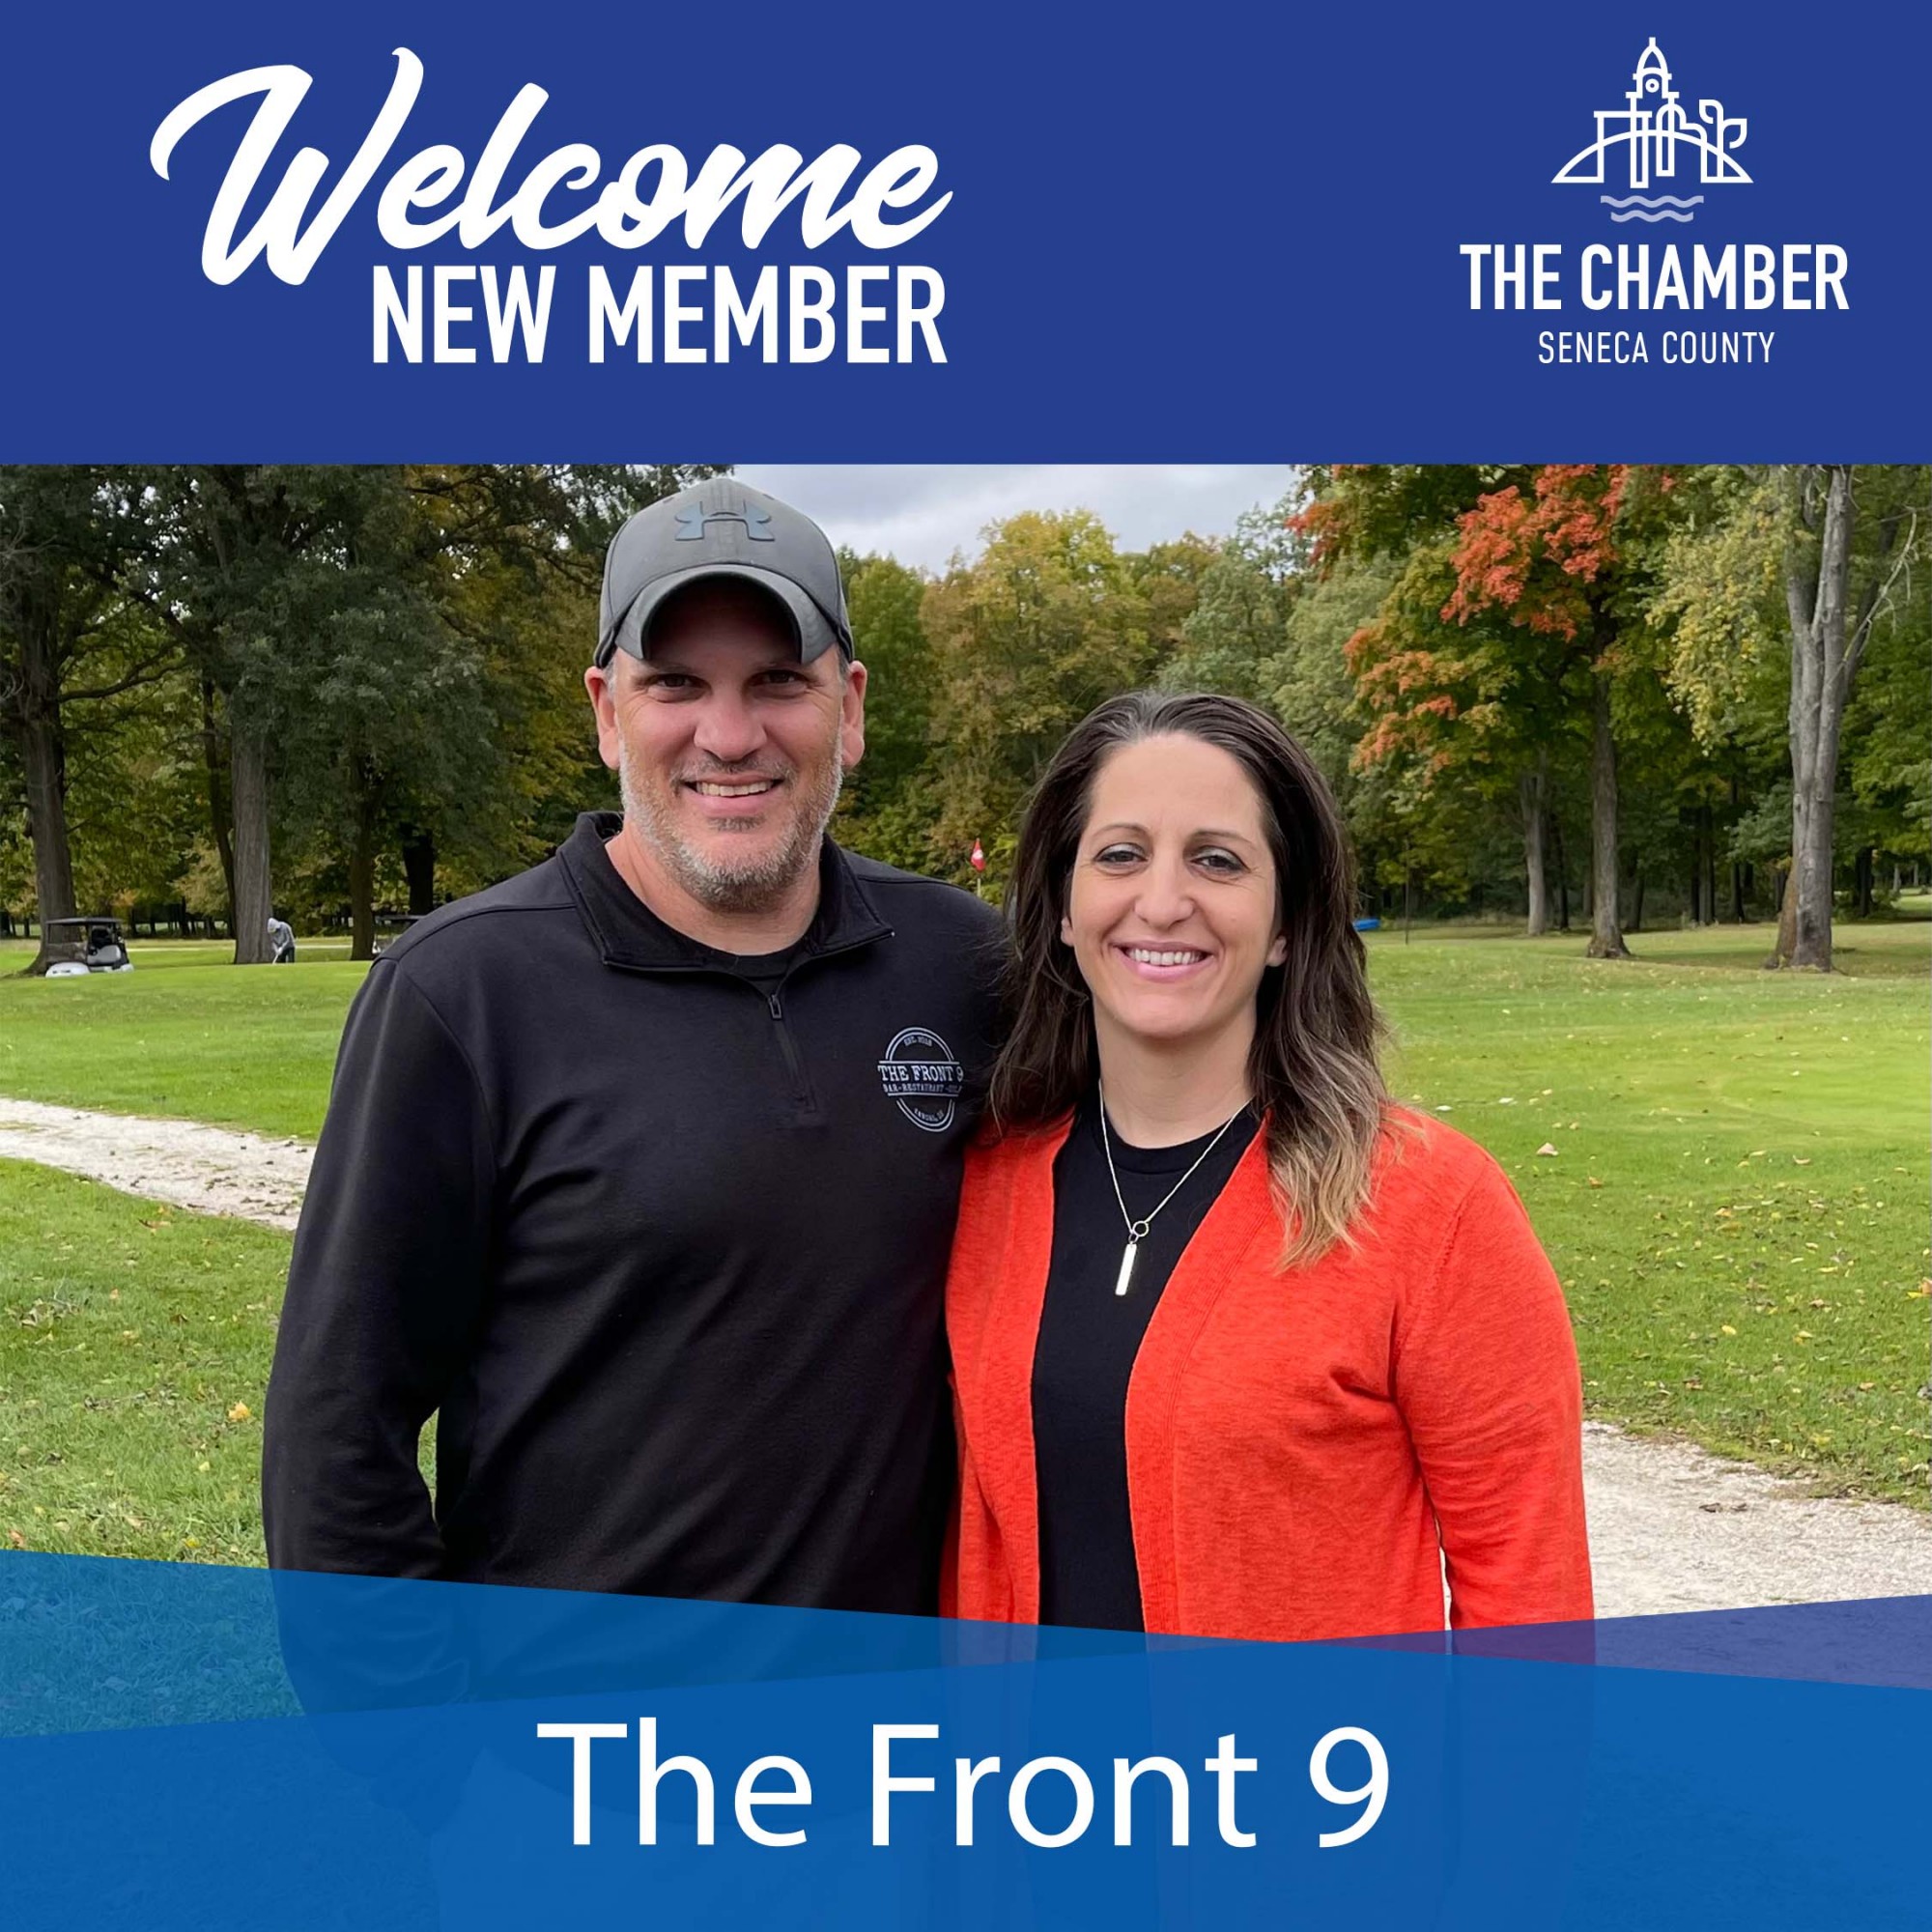 New Member: The Front 9